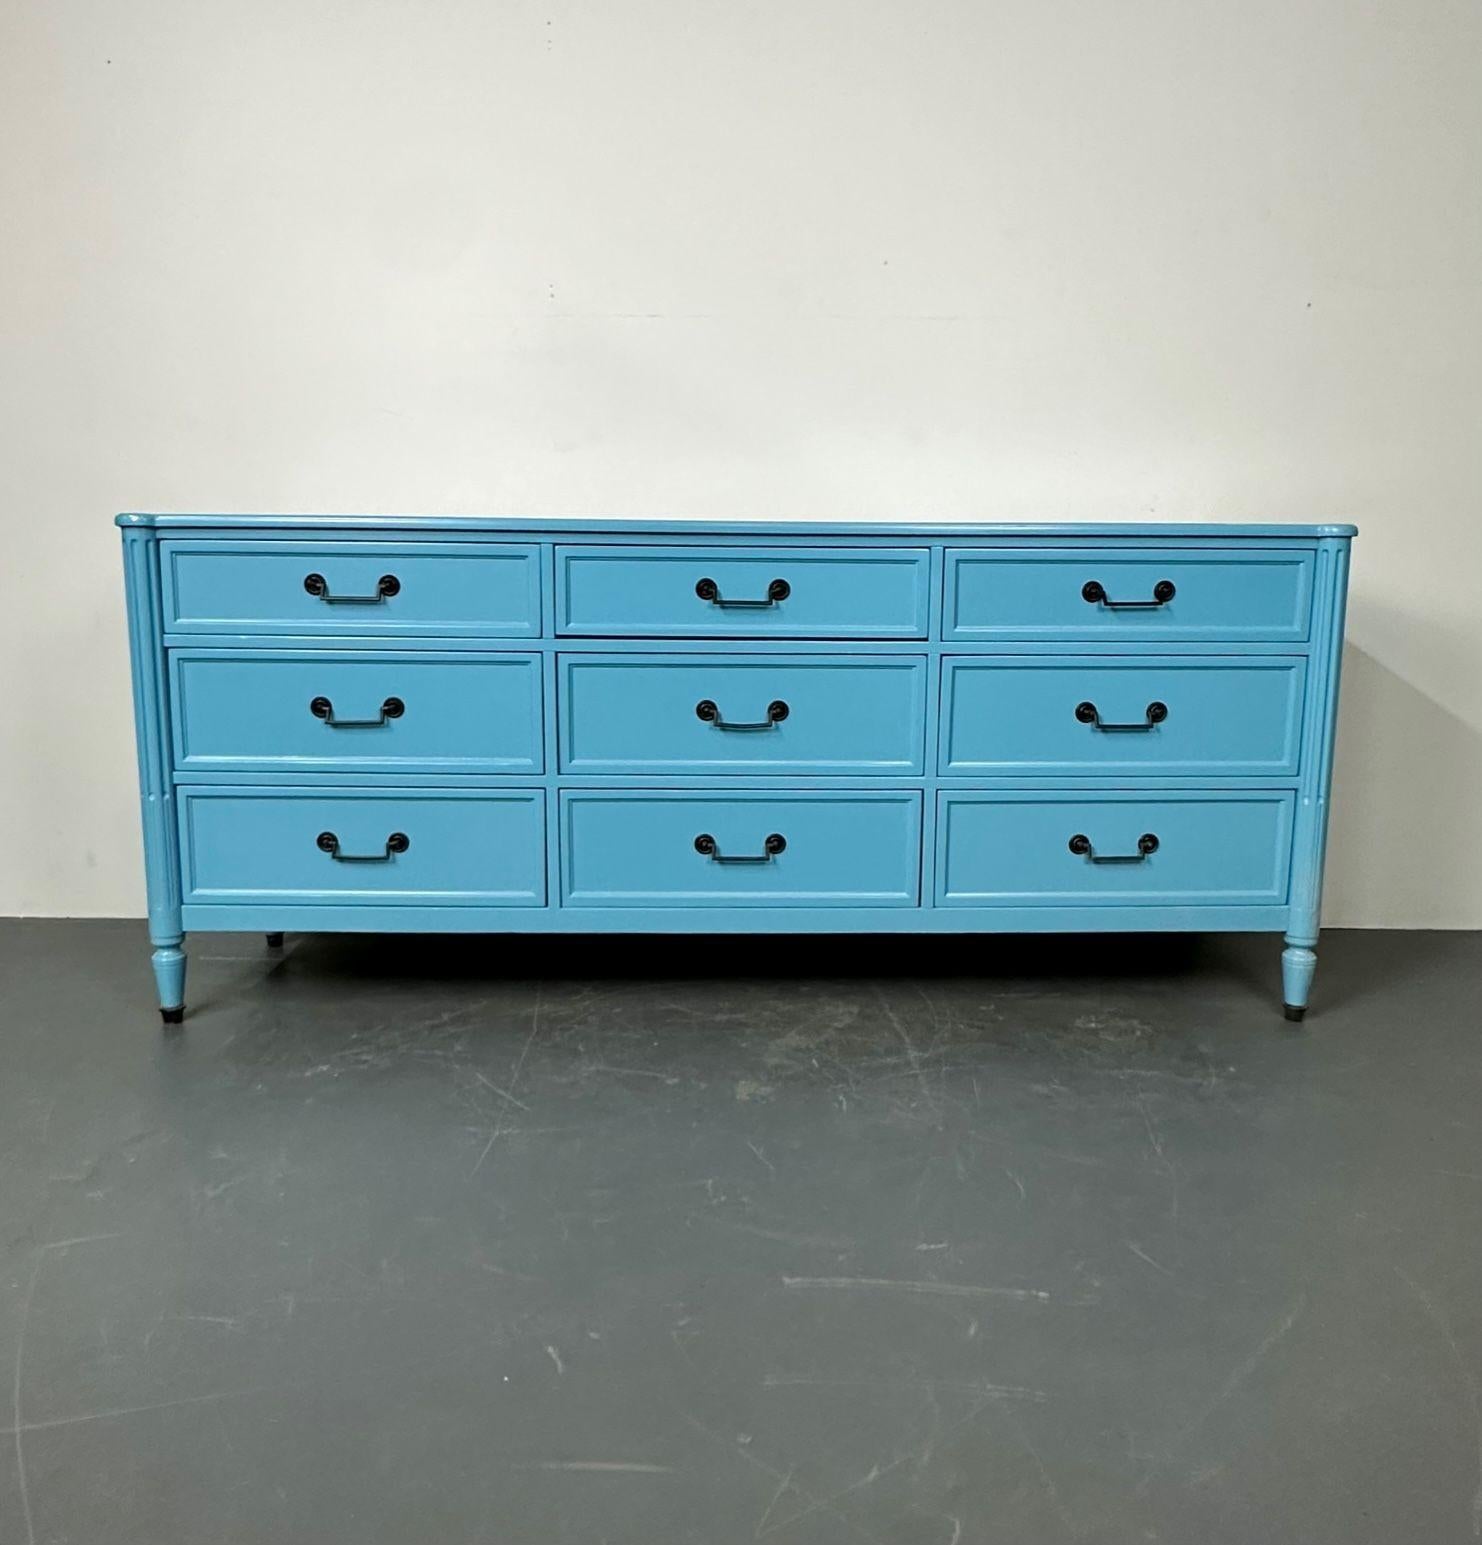 Hollywood Regency style dresser / sideboard, cerulean blue lacquer, brass accents, recently painted in our state of the art workshops.

Baker nine drawer chest painted in Cerulean Blu with black brass handle drawer pulls. the case with coffered